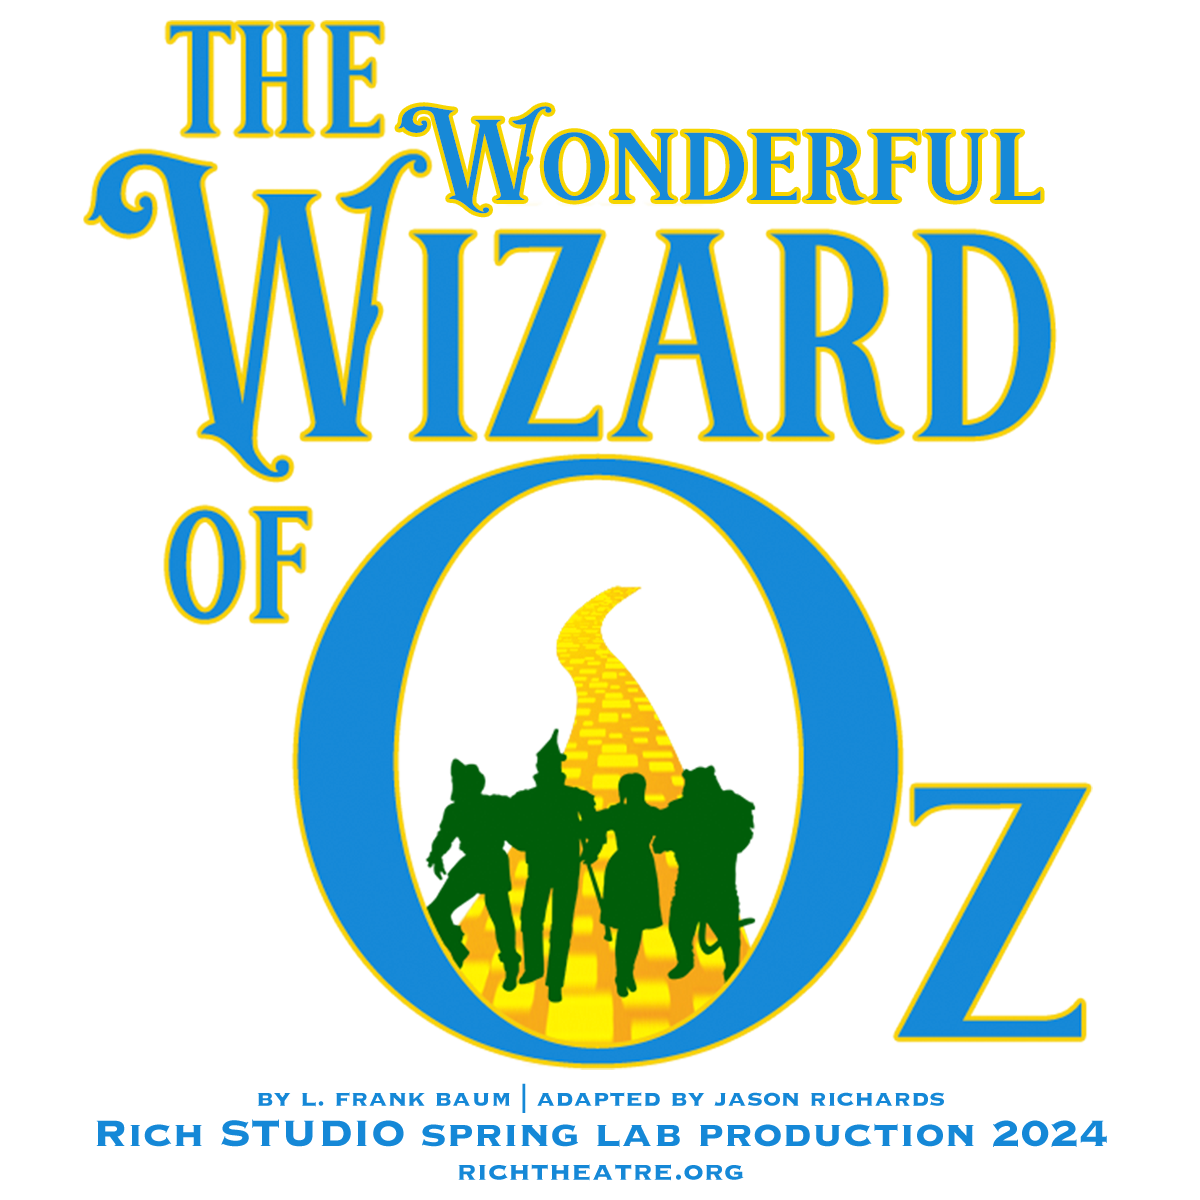 Wonderful Wizard of Oz - Full Title.png